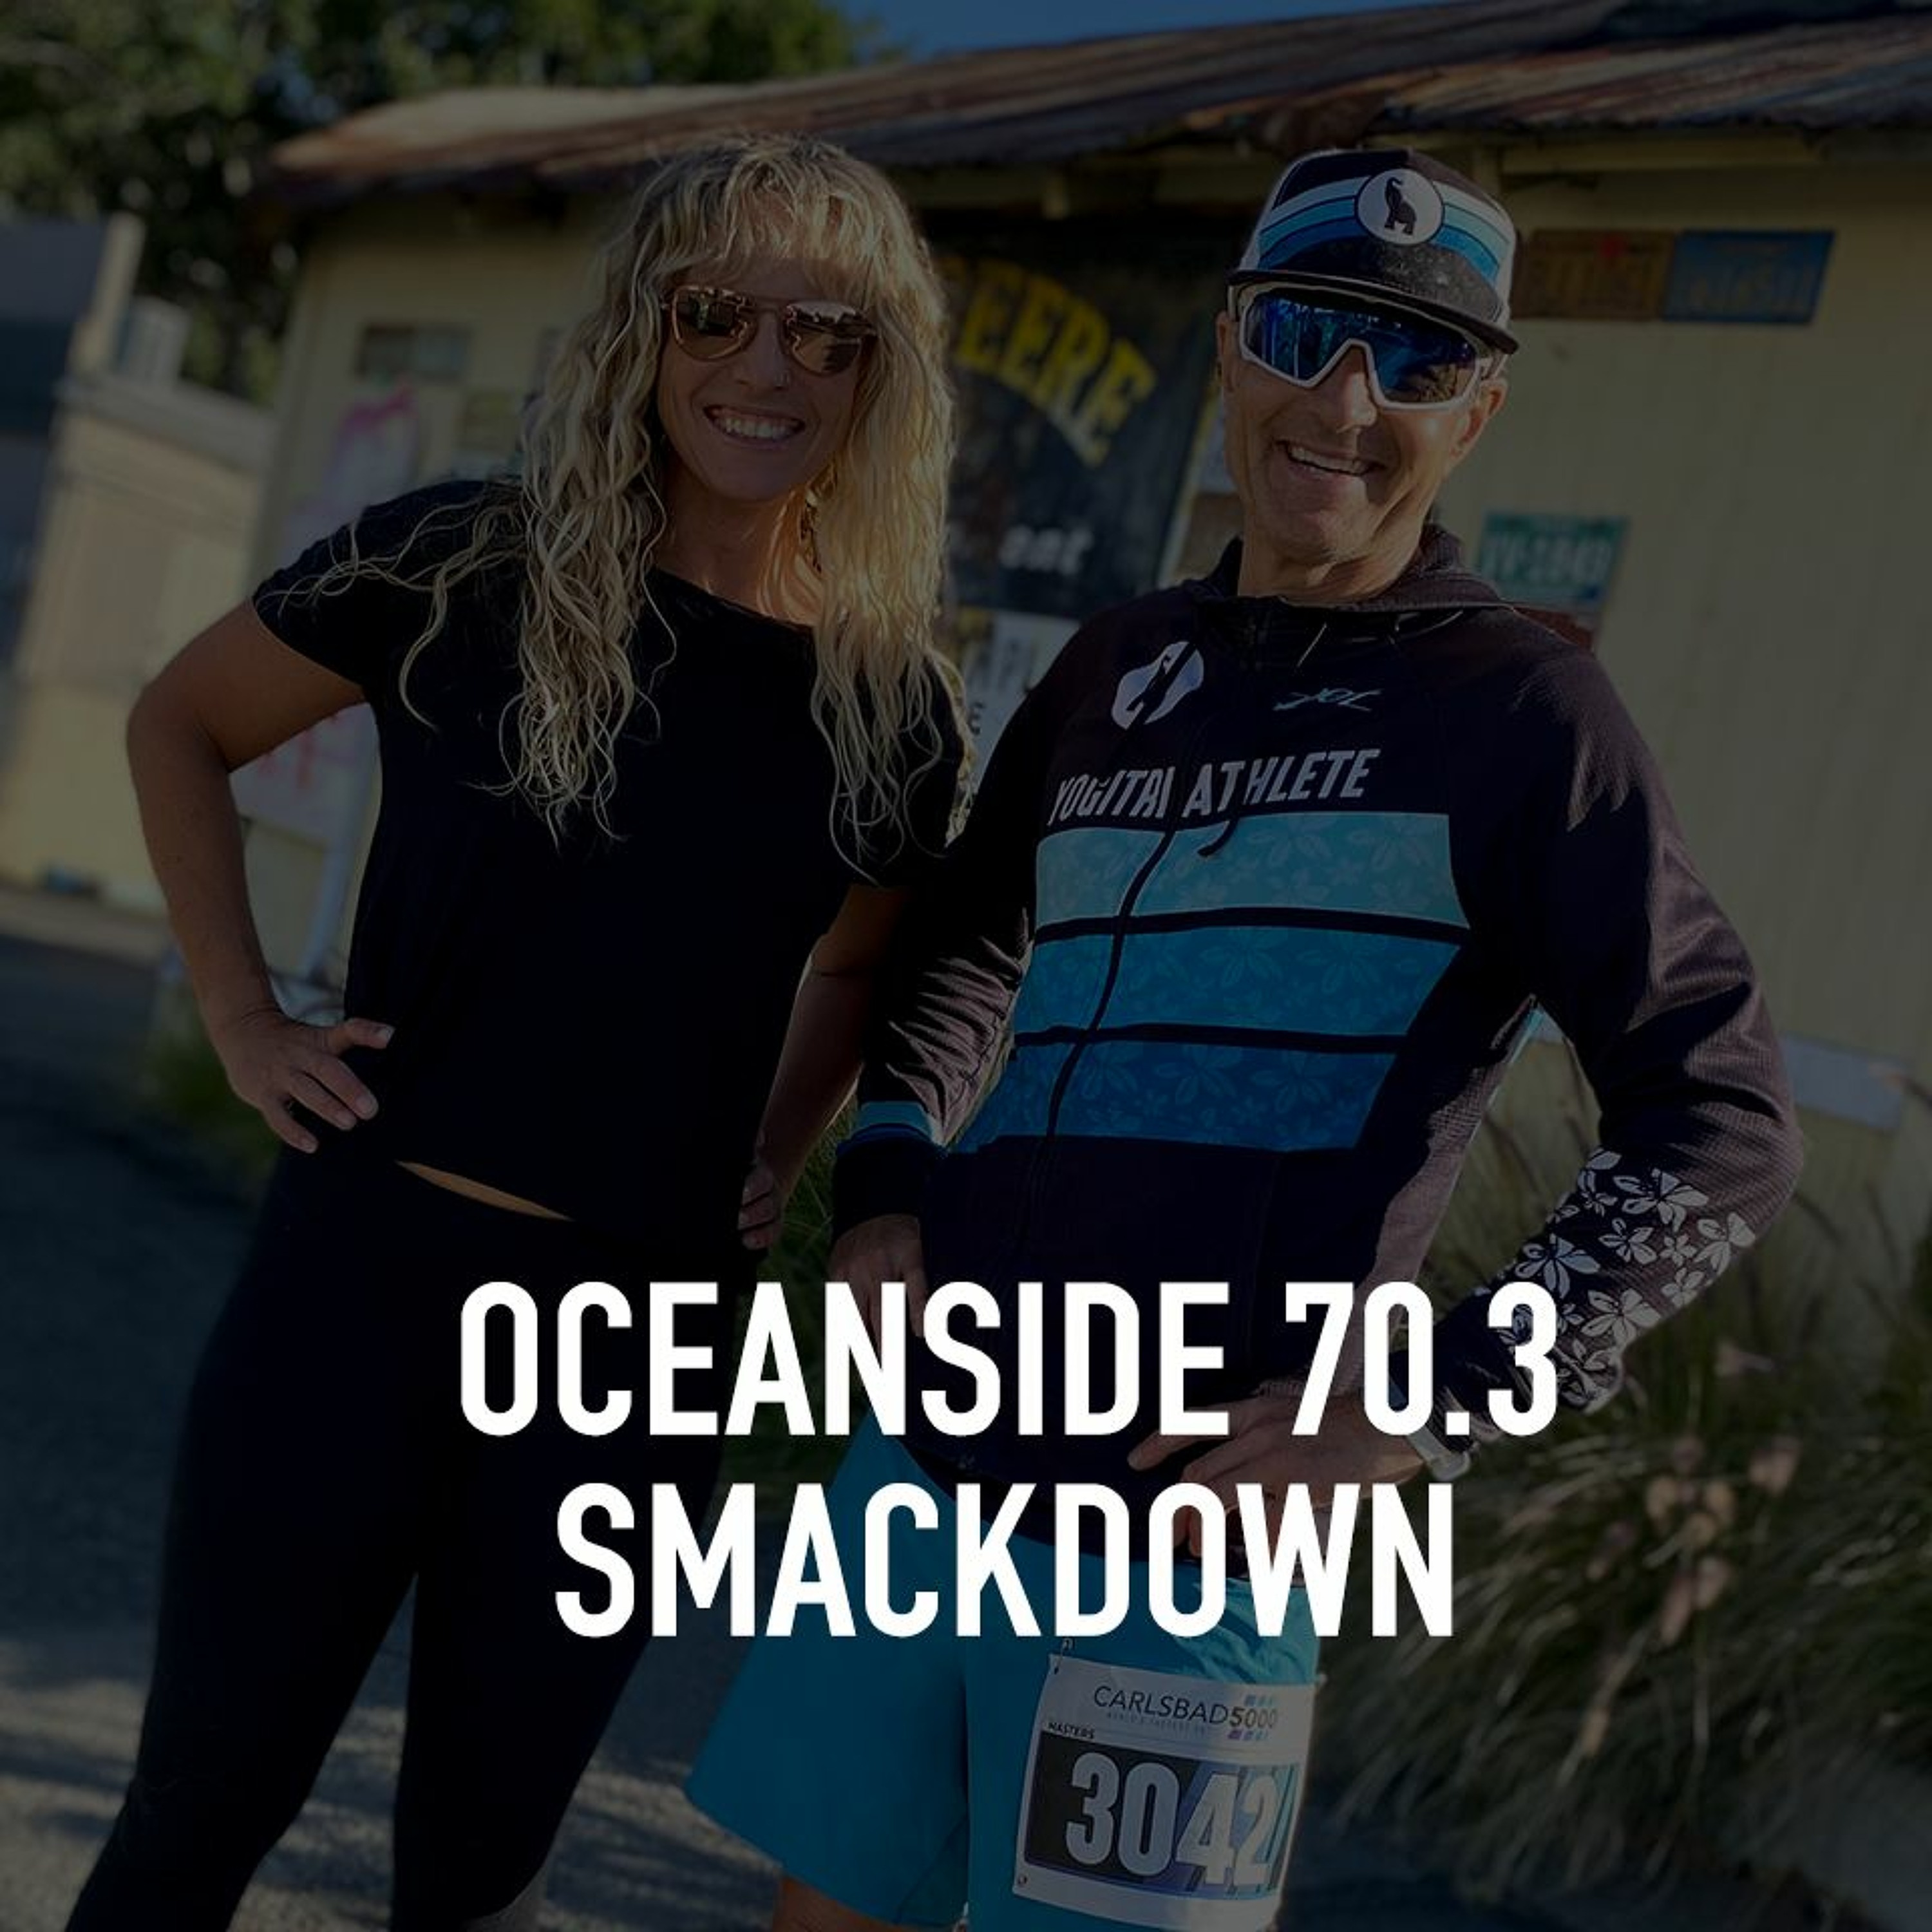 IRONMAN 70.3 Oceanside Smackdown with Coaches BJ and Jennifer